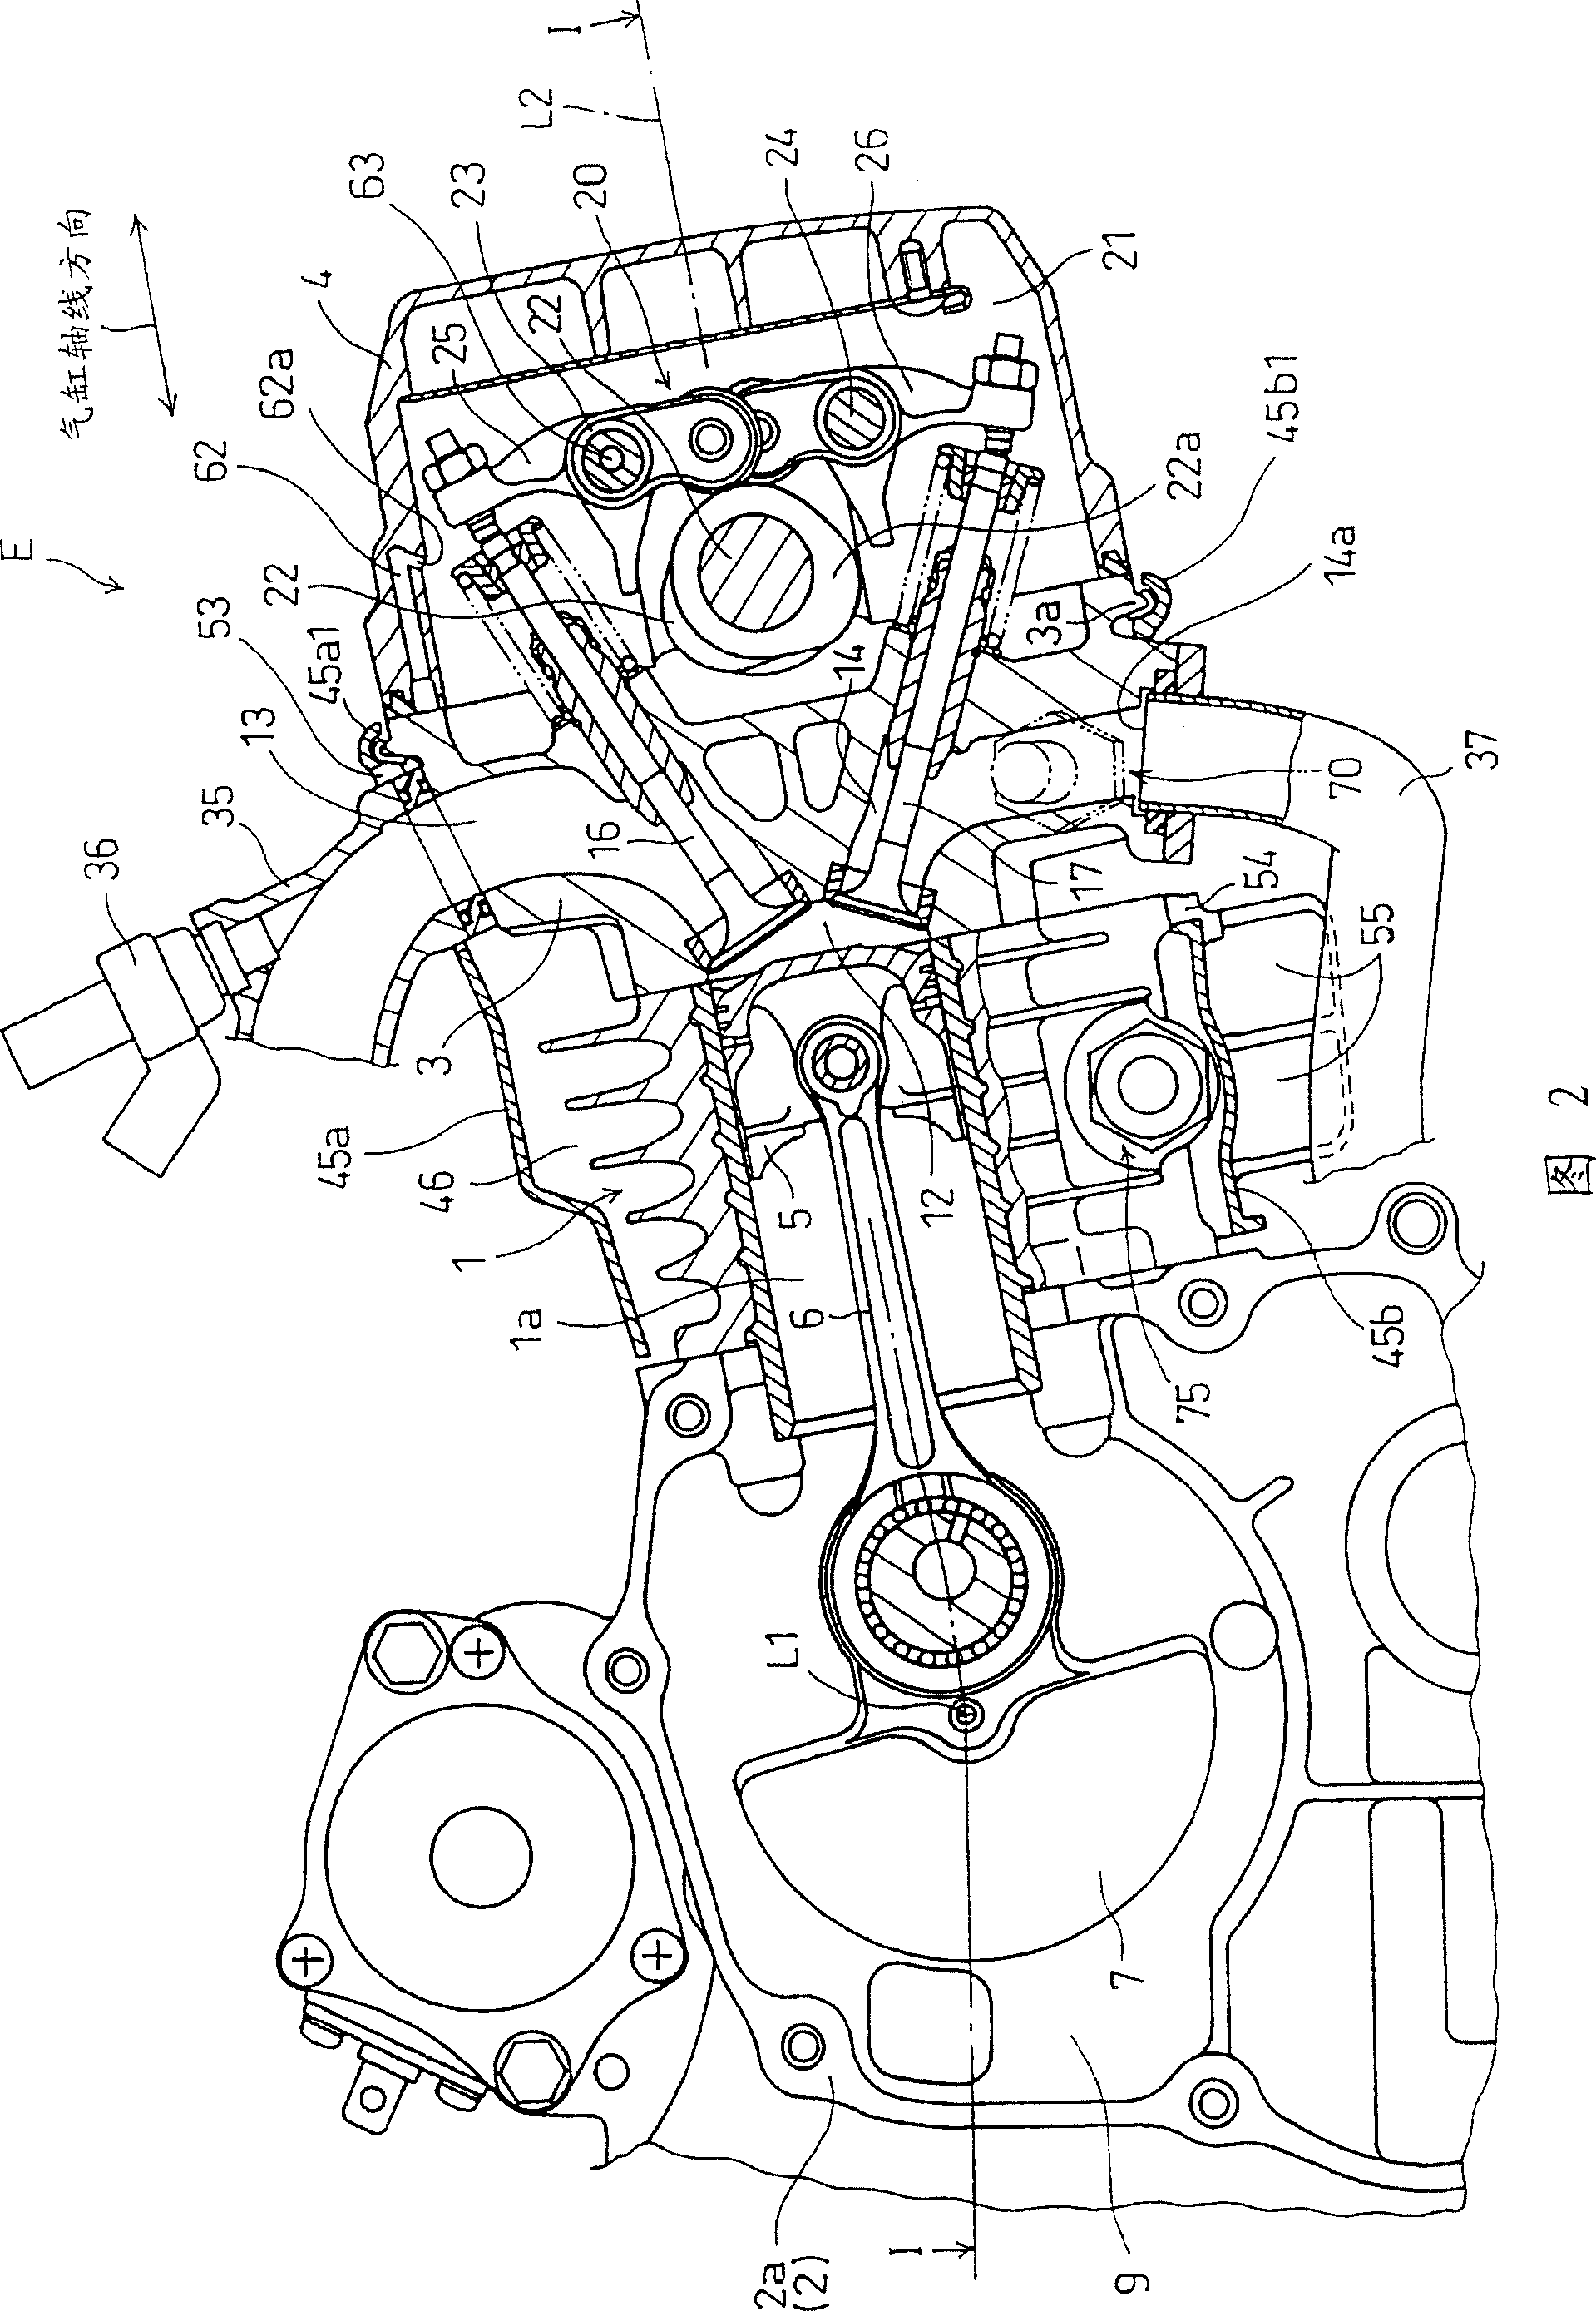 Air cooling internal combustion engine with sensor for detecting ic engine state